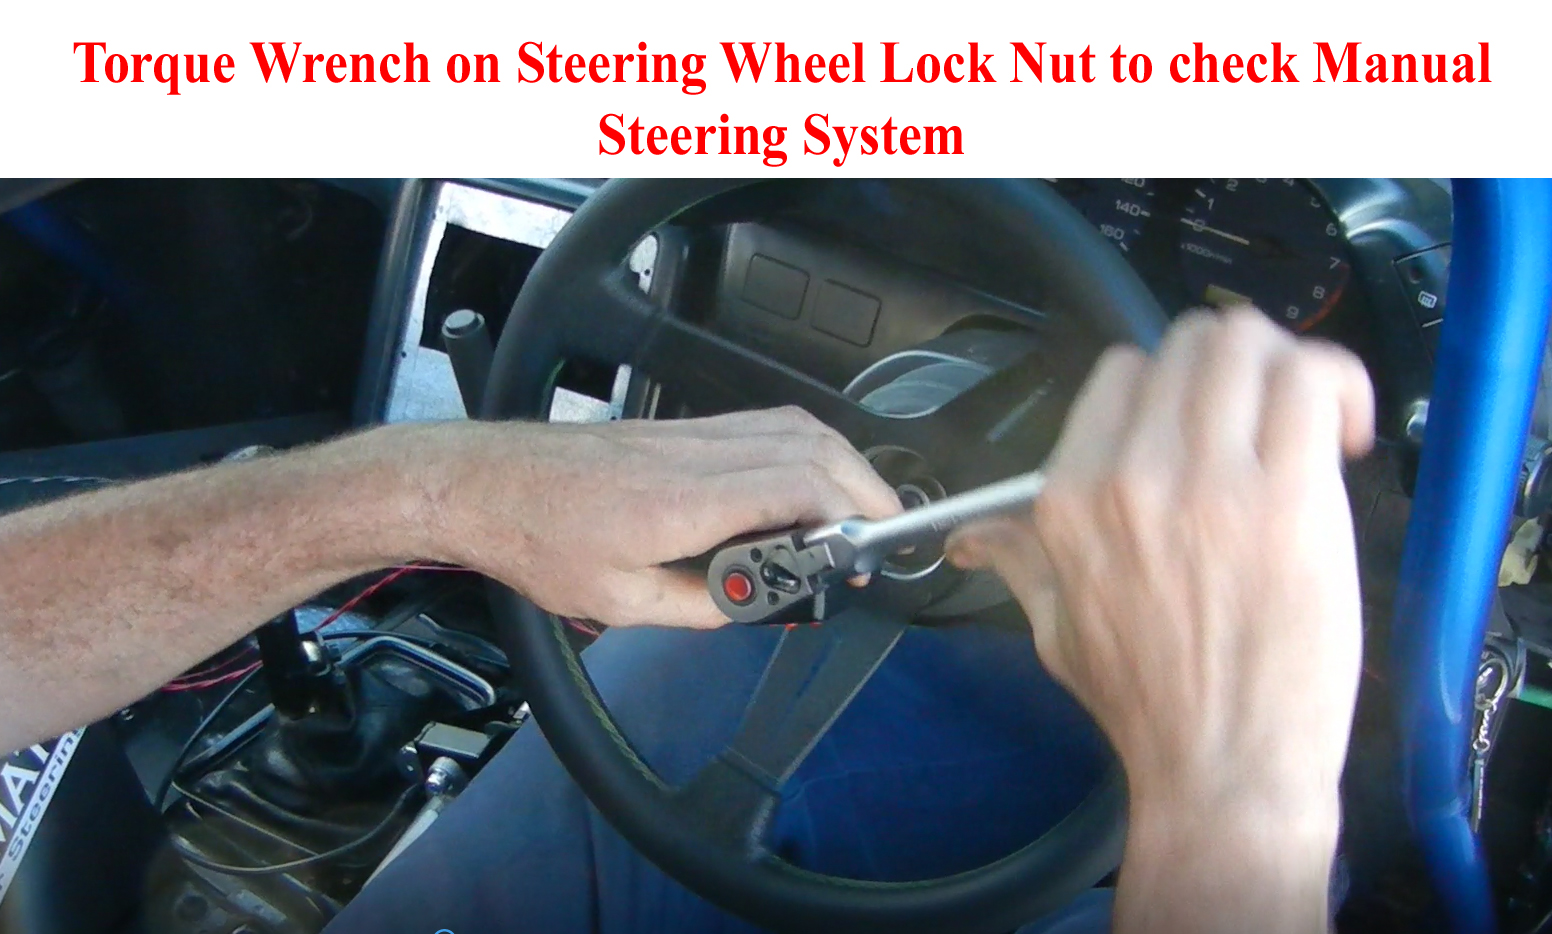 checking-torque-on-manual-steering-system-photo-no1.jpg